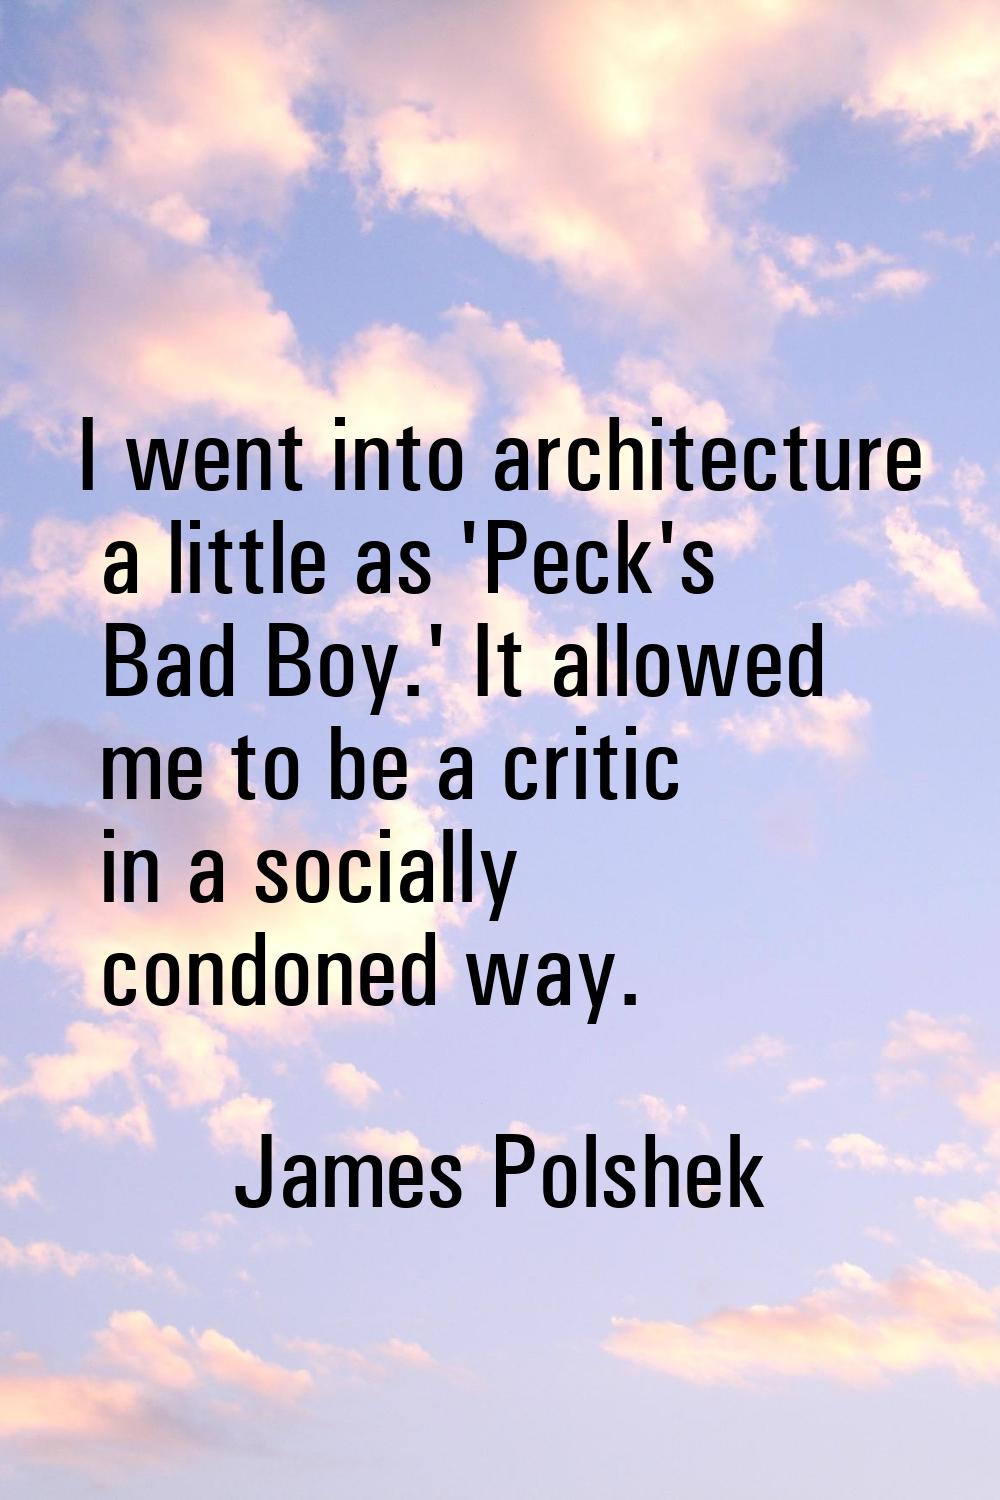 I went into architecture a little as 'Peck's Bad Boy.' It allowed me to be a critic in a socially c